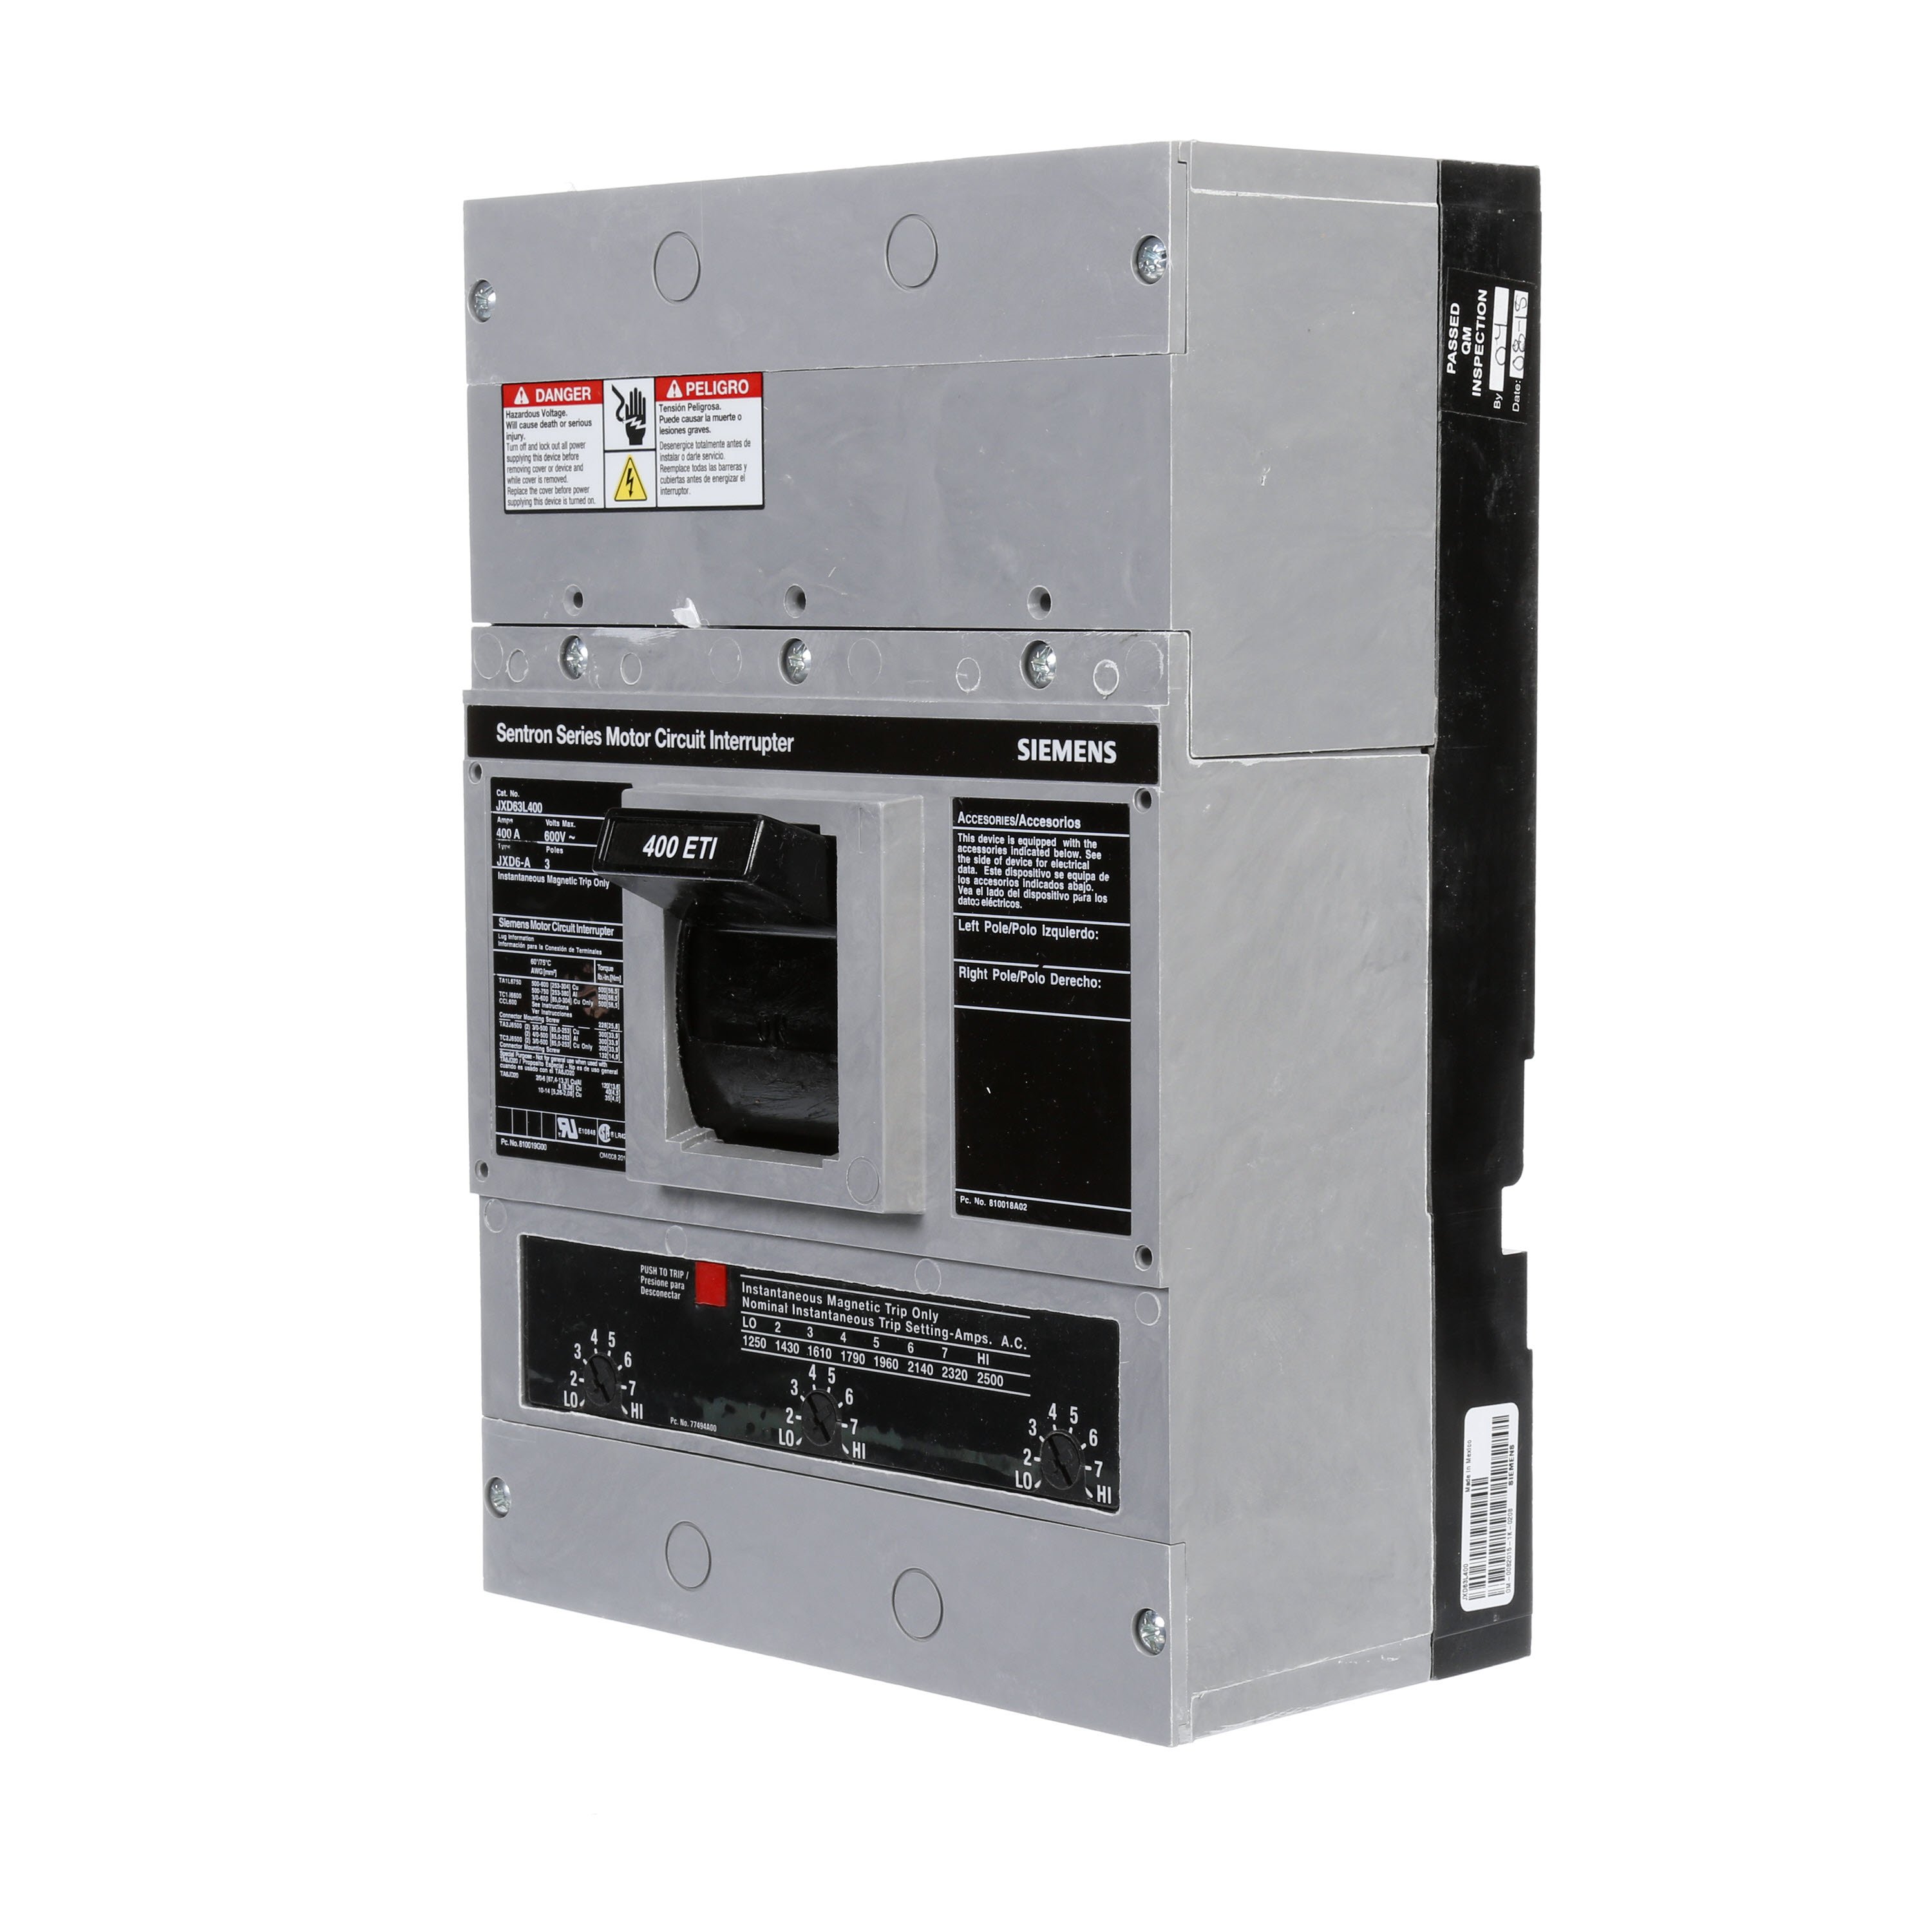 SIEMENS LOW VOLTAGE SENTRON MOLDED CASE CIRCUIT BREAKER WITH MAGNETIC TRIP ONLYUNIT. LOW INSTANTANEOUS RANGE ETI BREAKER JD FRAME W ITHSTANDARD BREAKING CAPACITY AND NON INTERCHANGEABLE TRIP. MEETS UL 489 /IEC 60947-2 STANDARDS. 400A 3-POLE BREAKER (25KAIC AT 600V) (35KAIC AT480V). SPECIAL FEATURES NO LUGS INSTALLED.DIMENSIONS (W x H x D) IN 7.5 x 11 x 4._____________________________________ ___________________________________